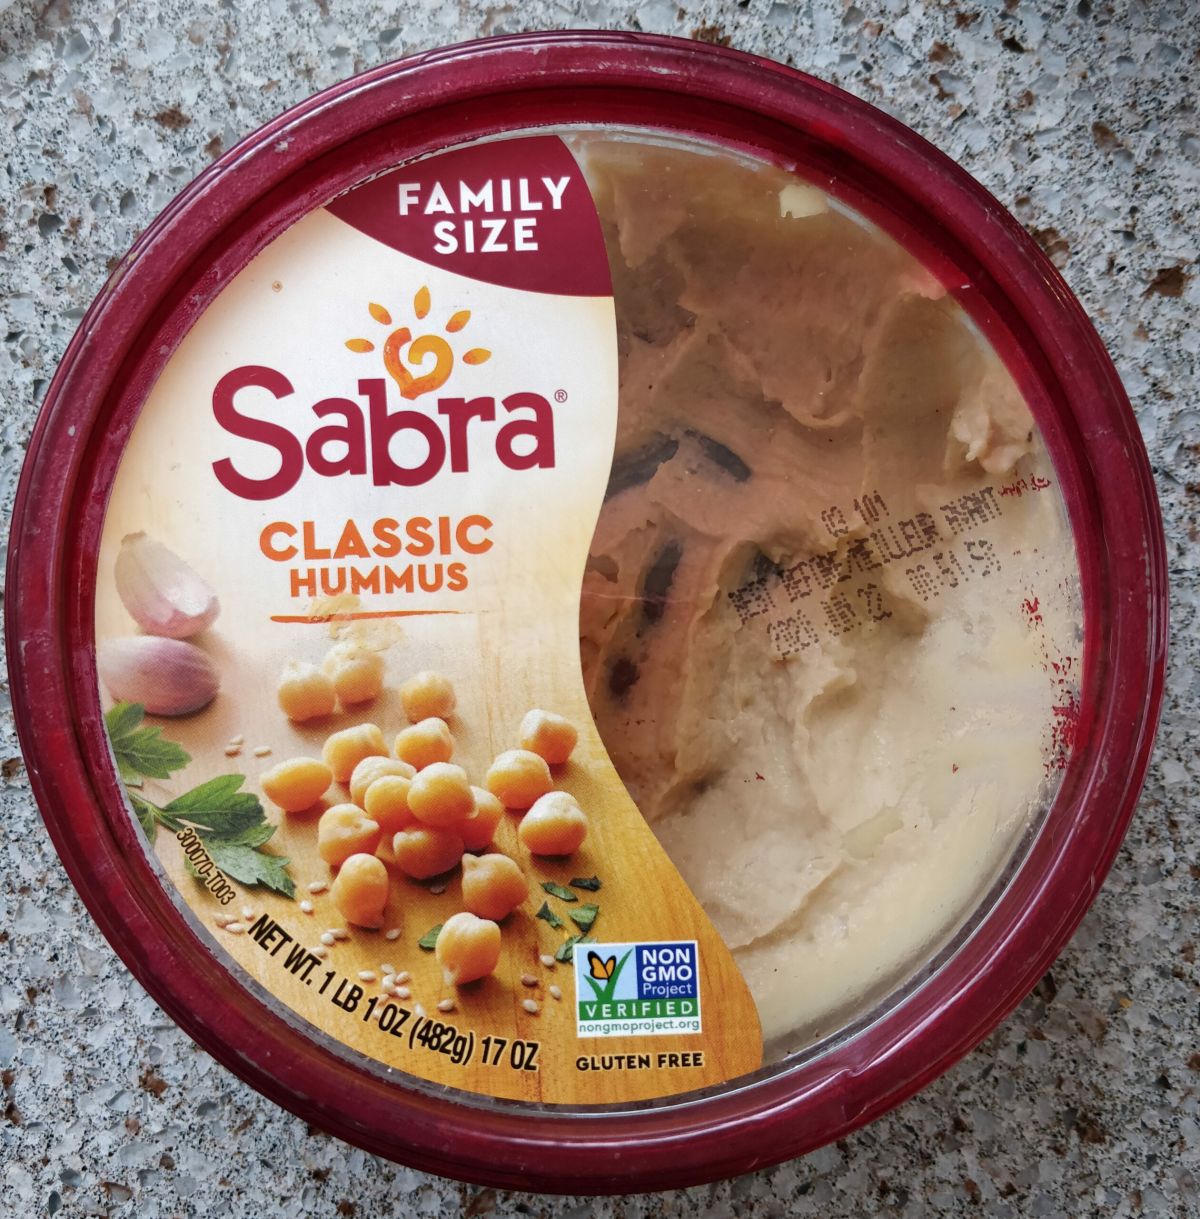 On this day February 8 2018: Why was Sabra hummus removed from campus shelves?